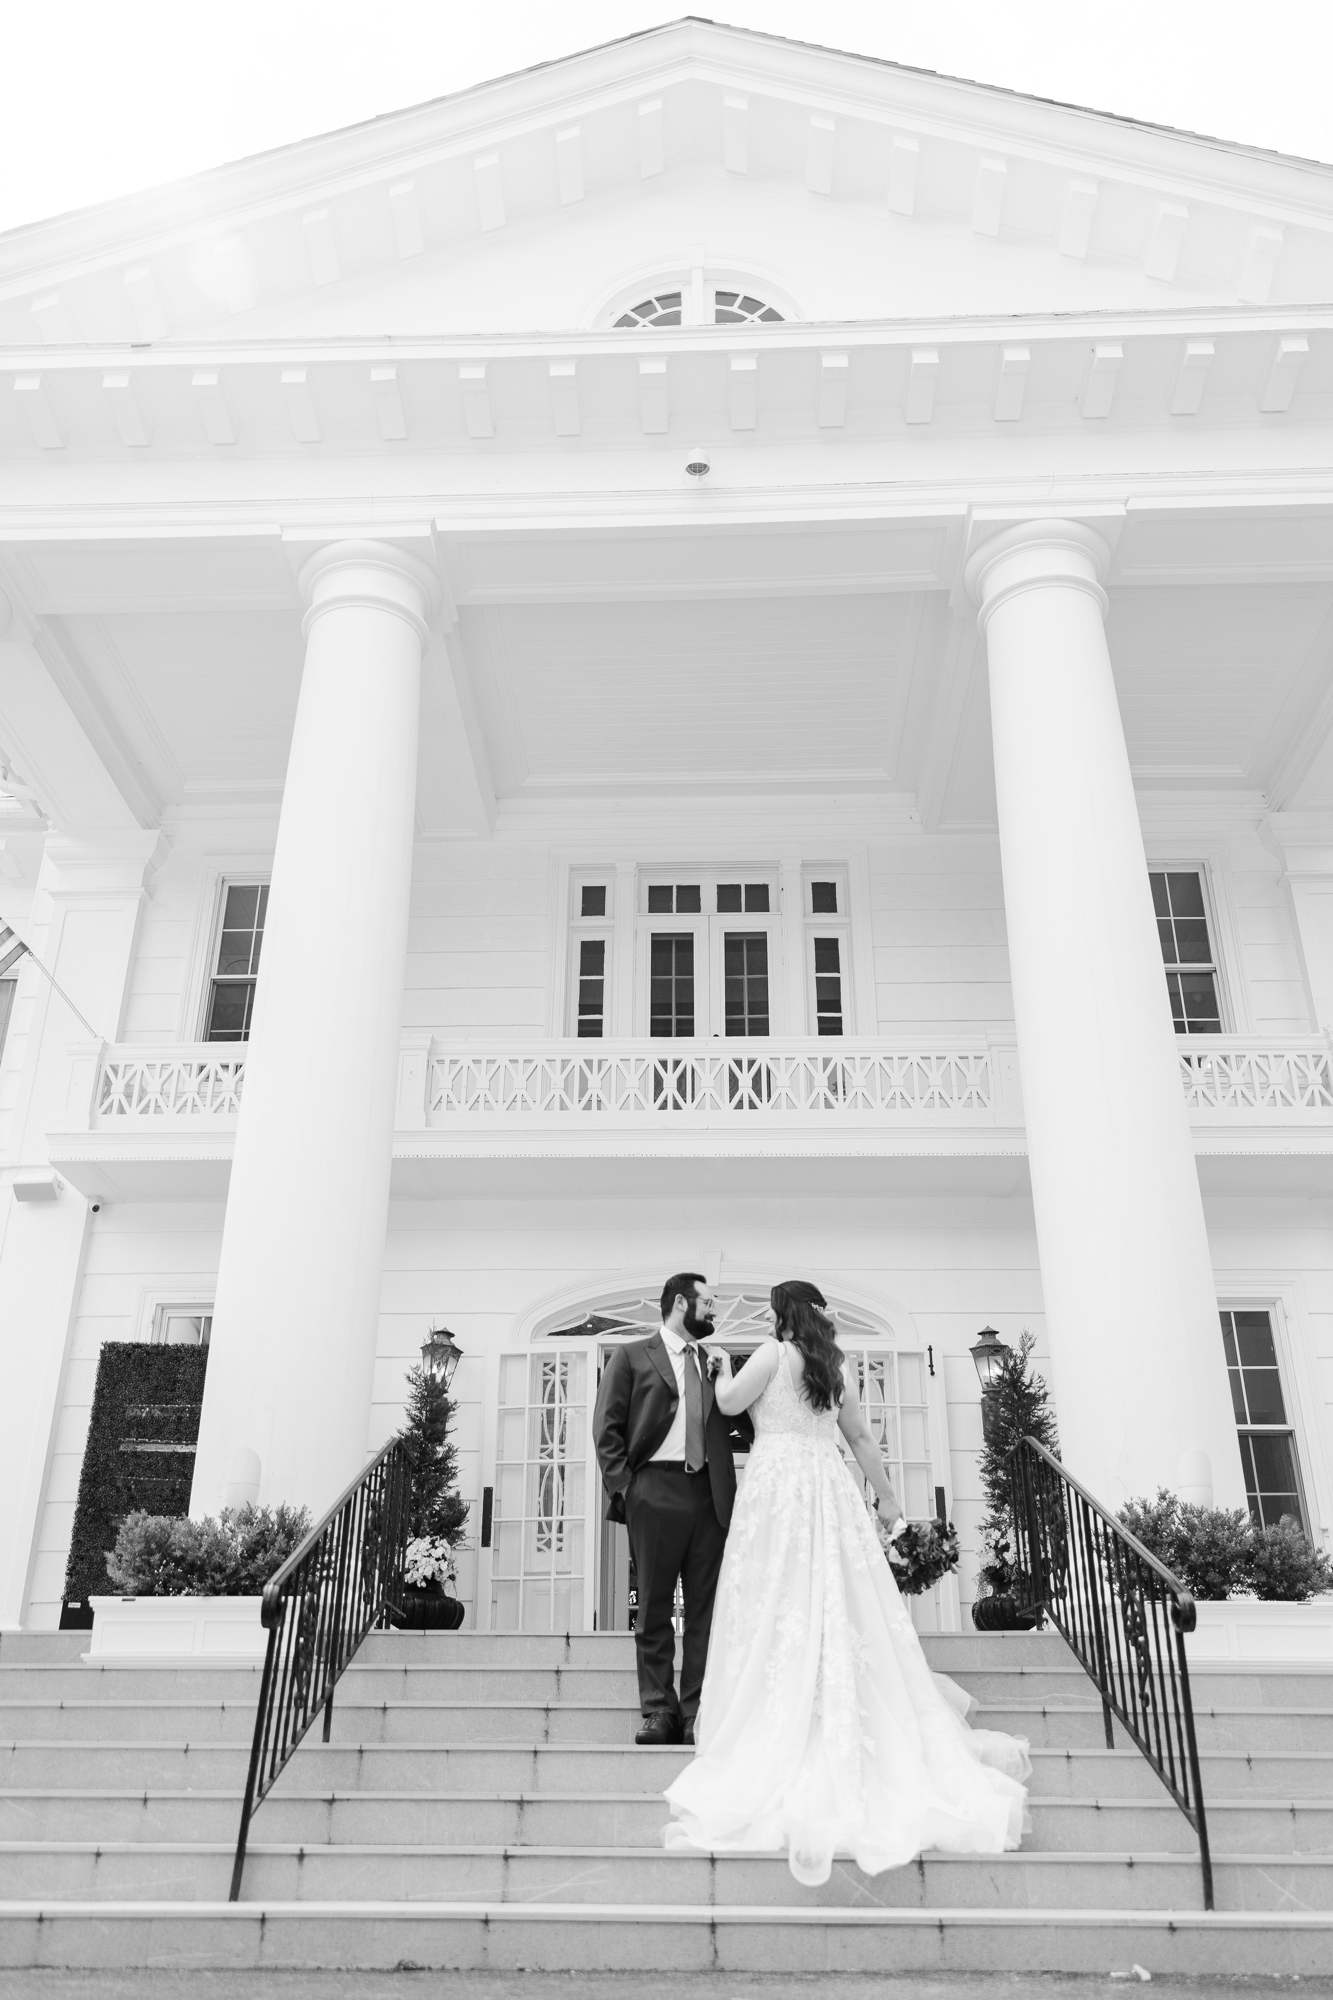 Timeless Wedding at Briarcliff Manor in New York